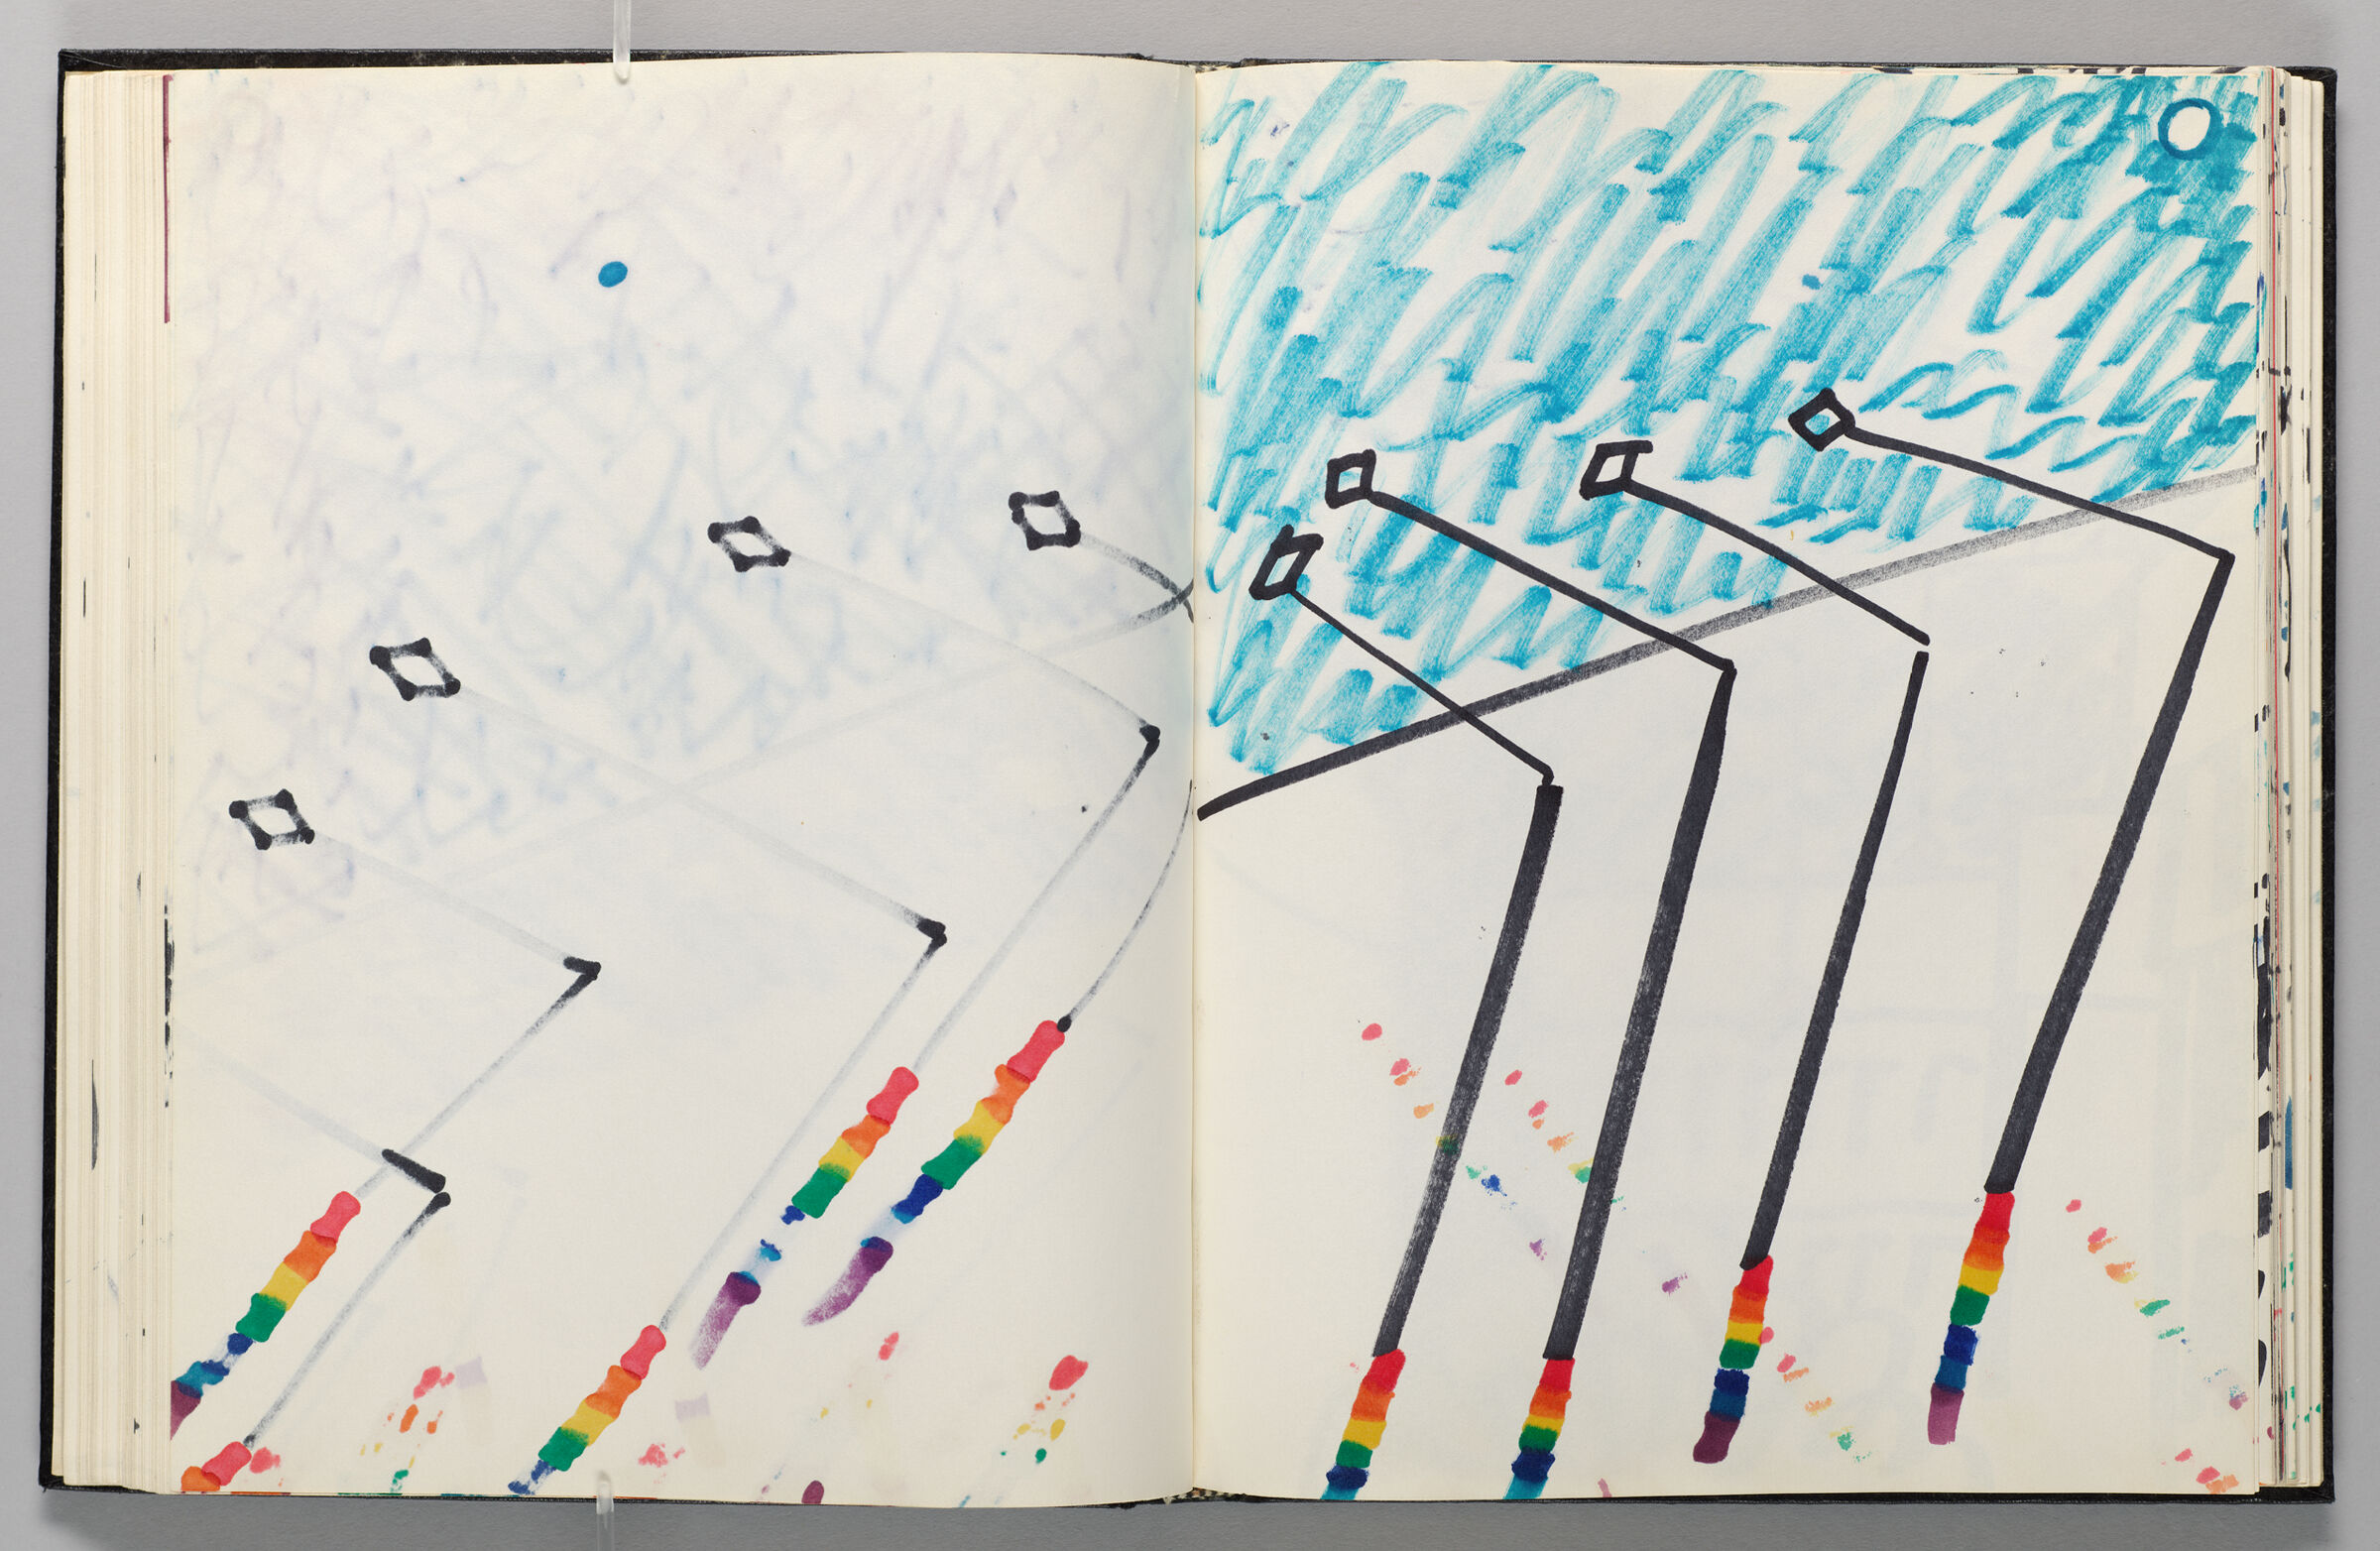 Untitled (Bleed-Through Of Previous Page, Left Page); Untitled (Prisms Projecting From Facade Incorporating Bleed-Through From Previous Pages, Right Page)